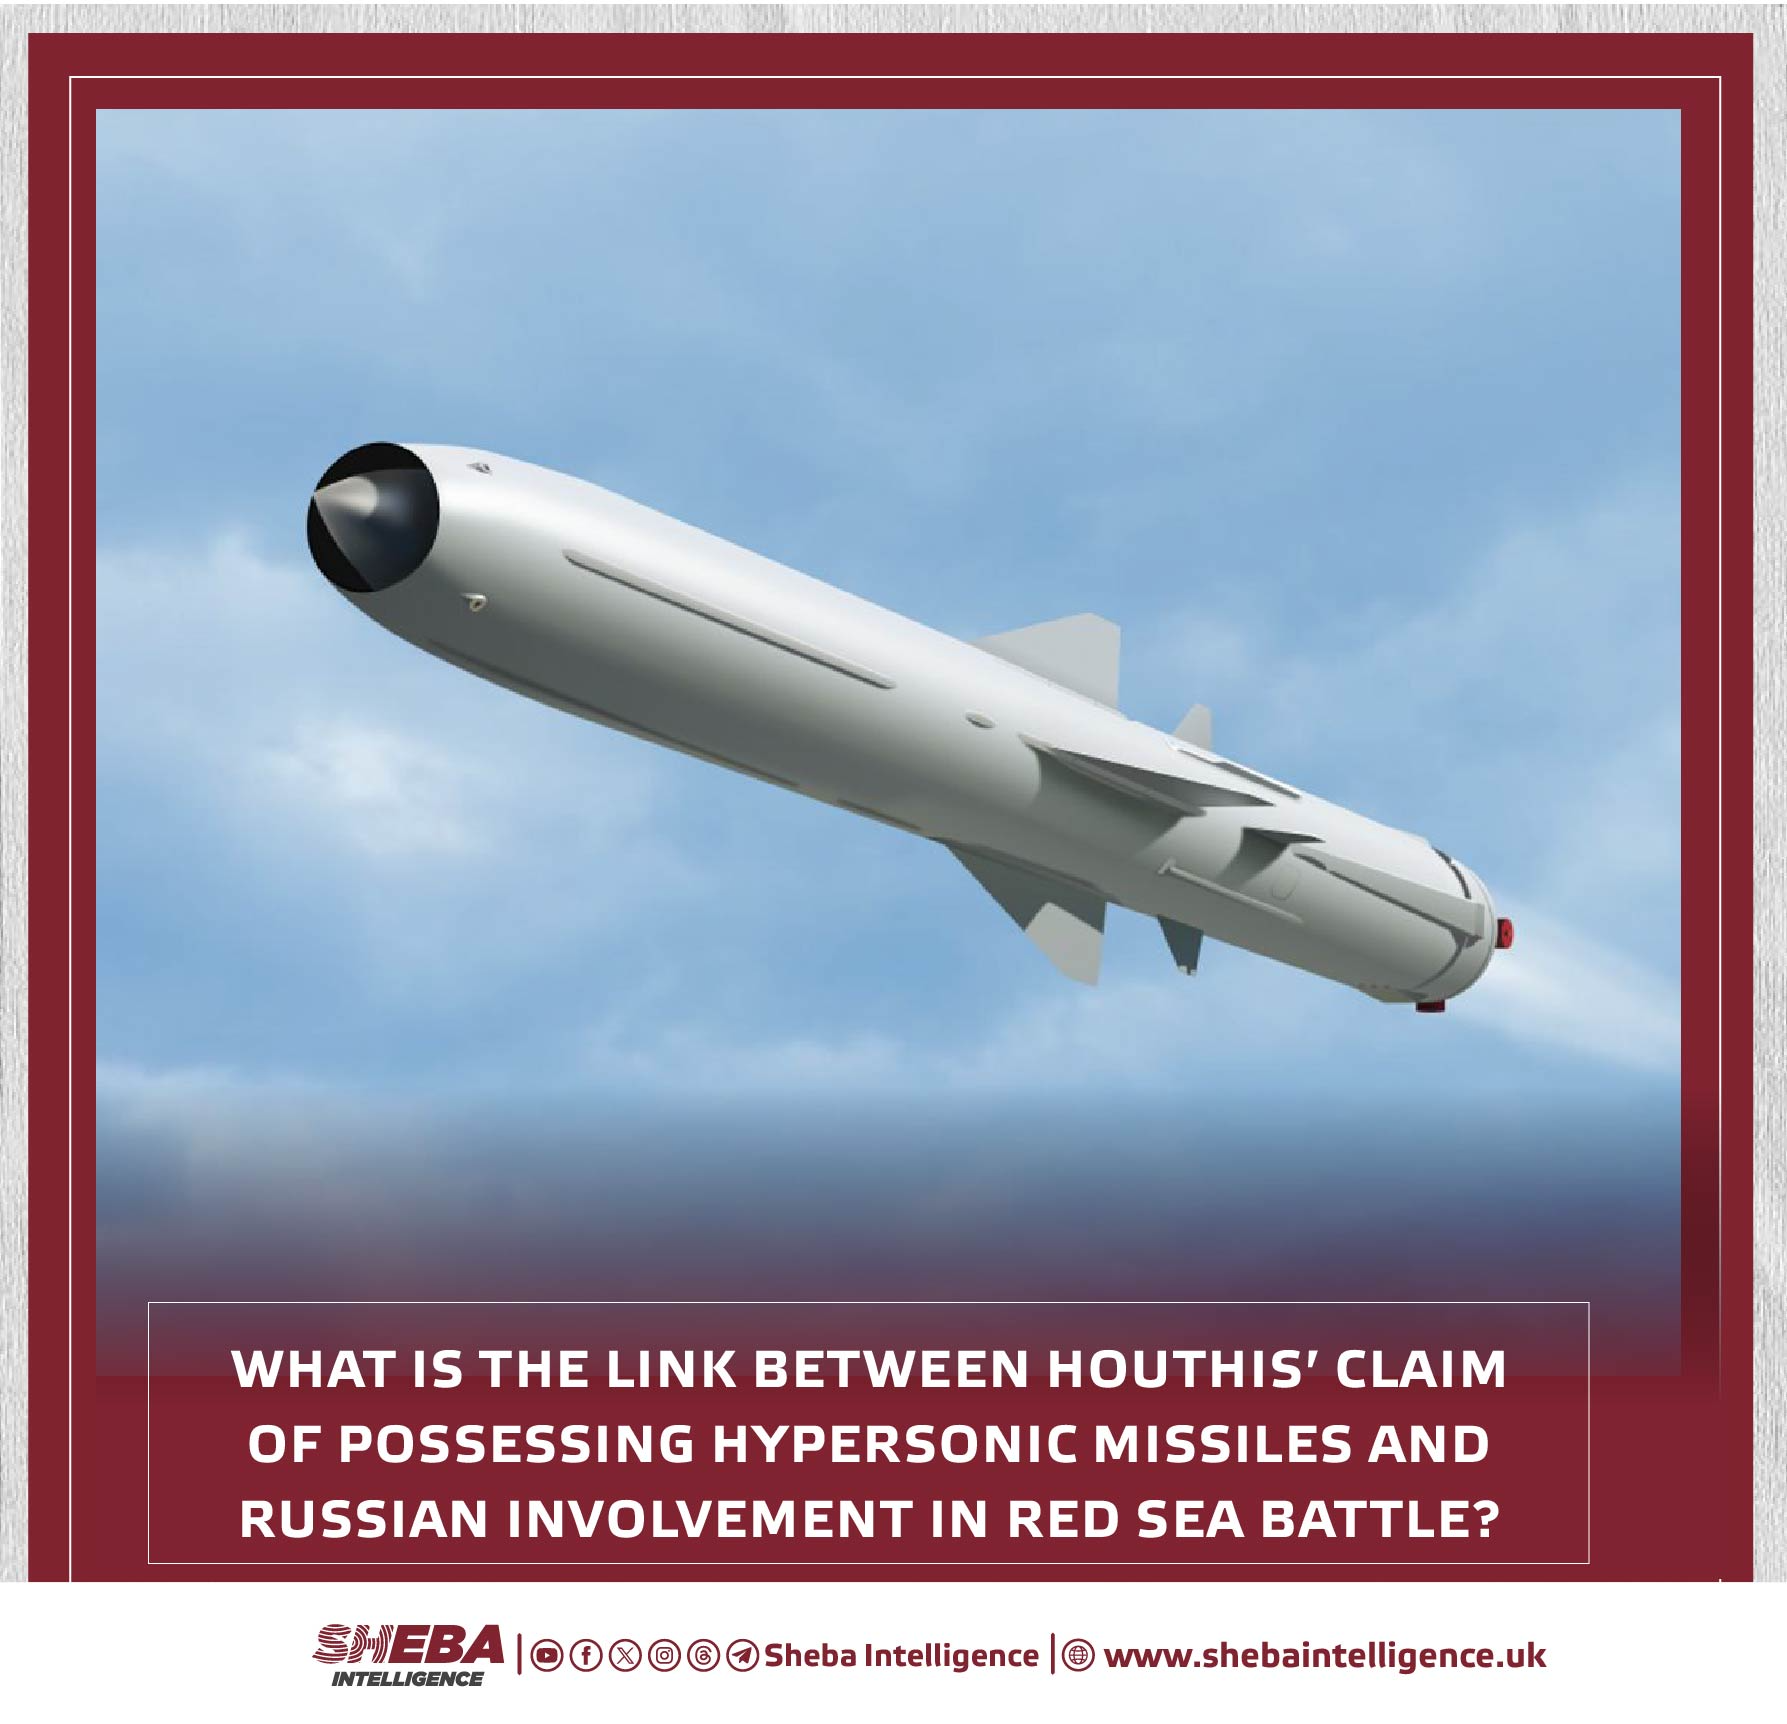 What is the Link Between Houthis' Claim of Possessing Hypersonic Missiles and Russian Involvement in Red Sea Battle?